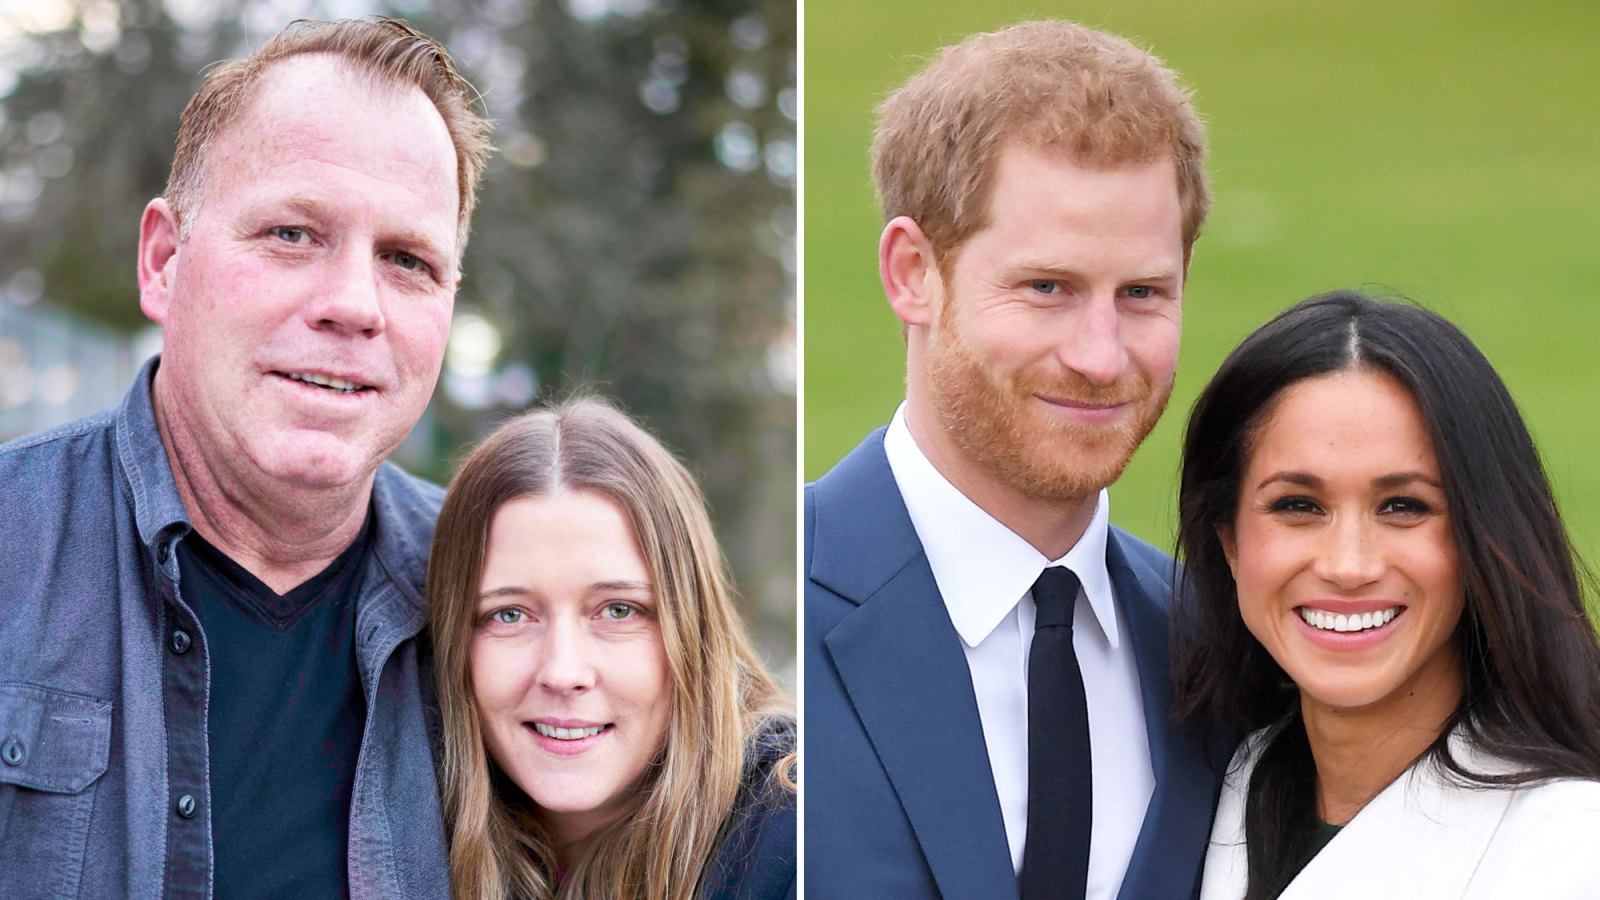 Meghan Markle and Prince Harry Darlene Blount Duchess Meghan’s Estranged Half-Brother Thomas Markle Jr. Is Engaged, Wants Her and Prince Harry to Come to His Wedding